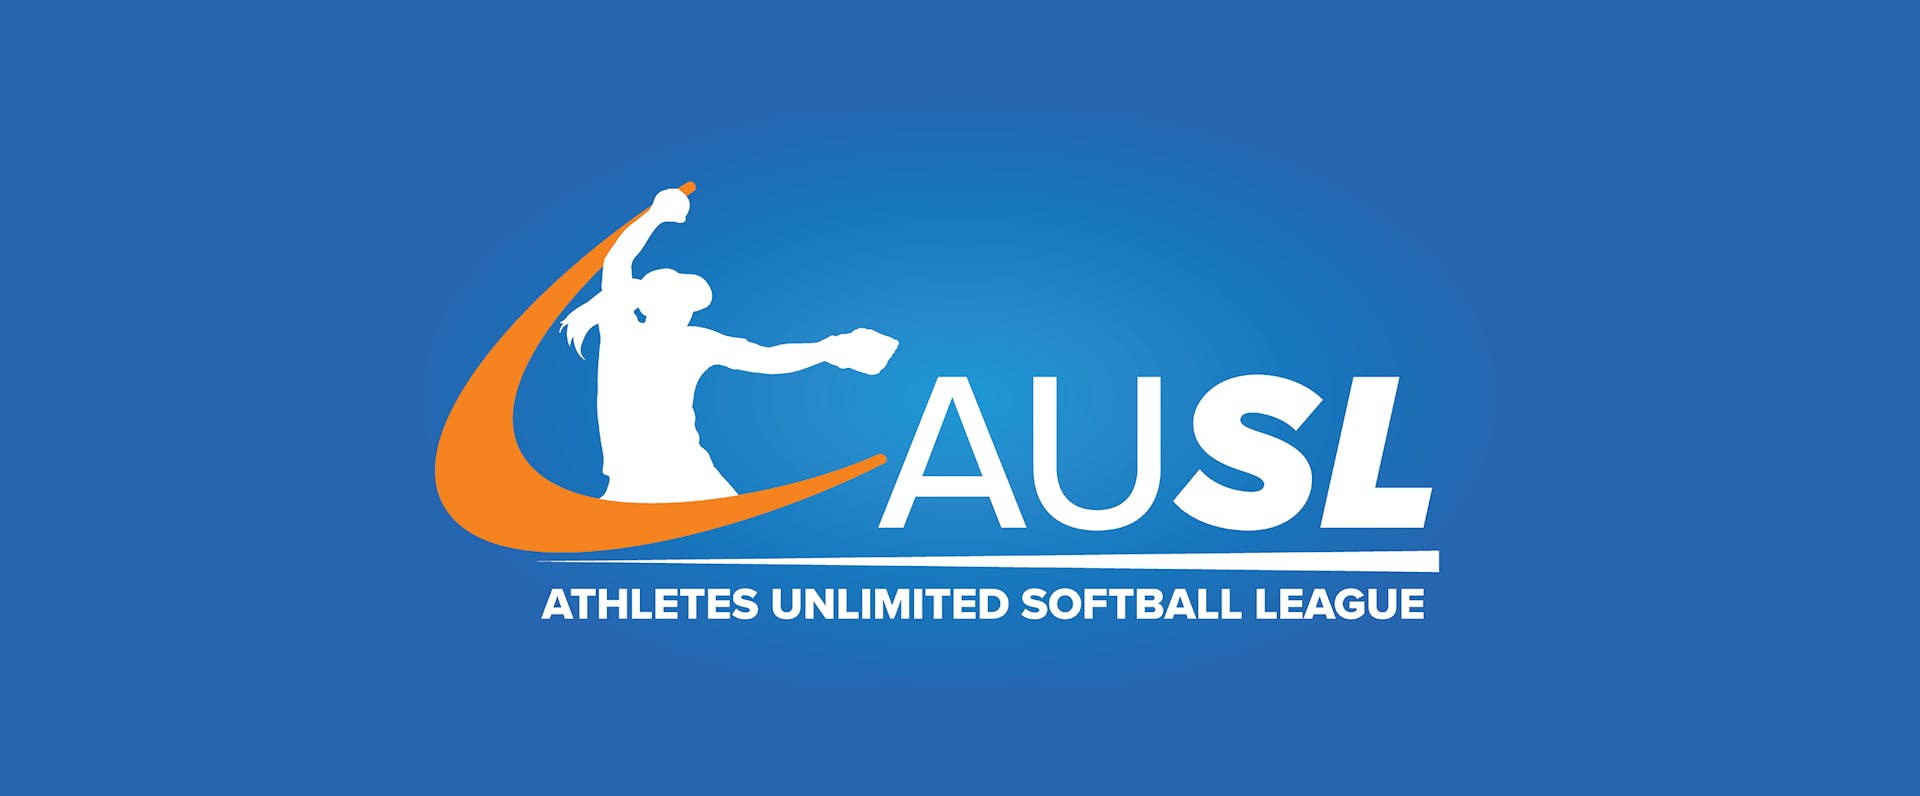 Silhouette of a softball pitcher in the windmill motion with an orange swoosh mark and the letters A, U, S, L on a blue background and Athletes Unlimited Softball League written underneath.